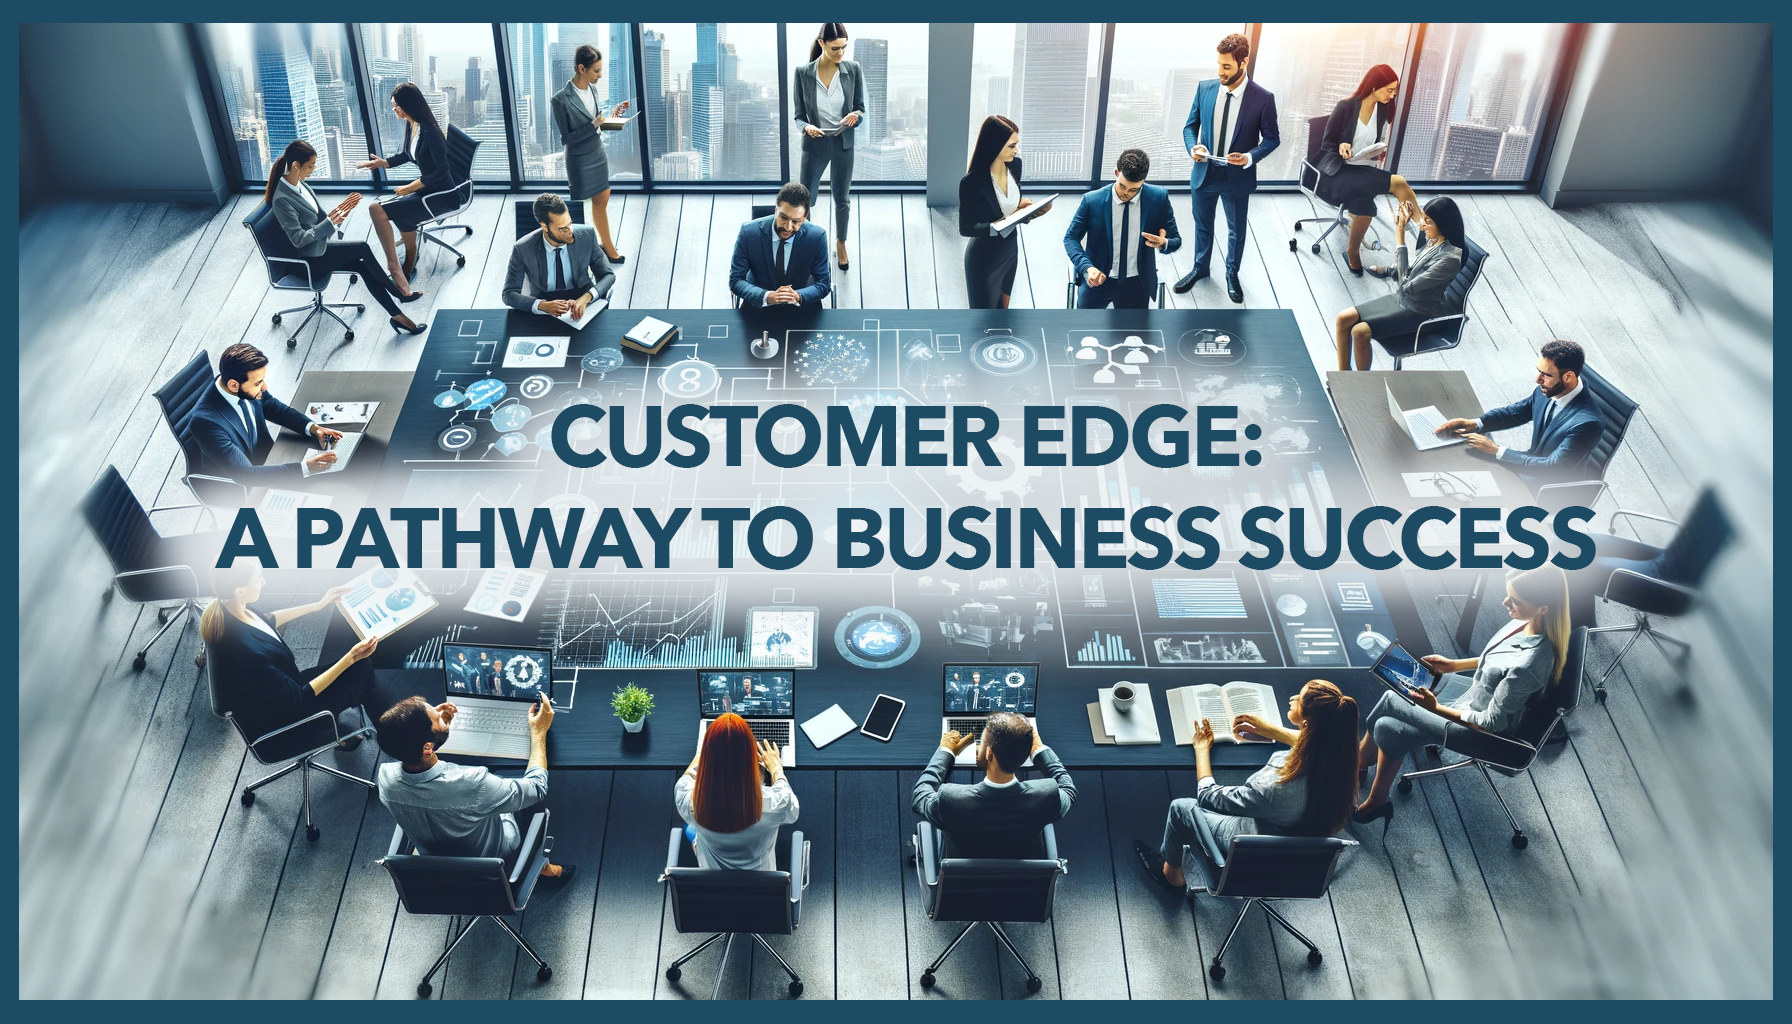 Customer Edge: A Pathway to Business Success